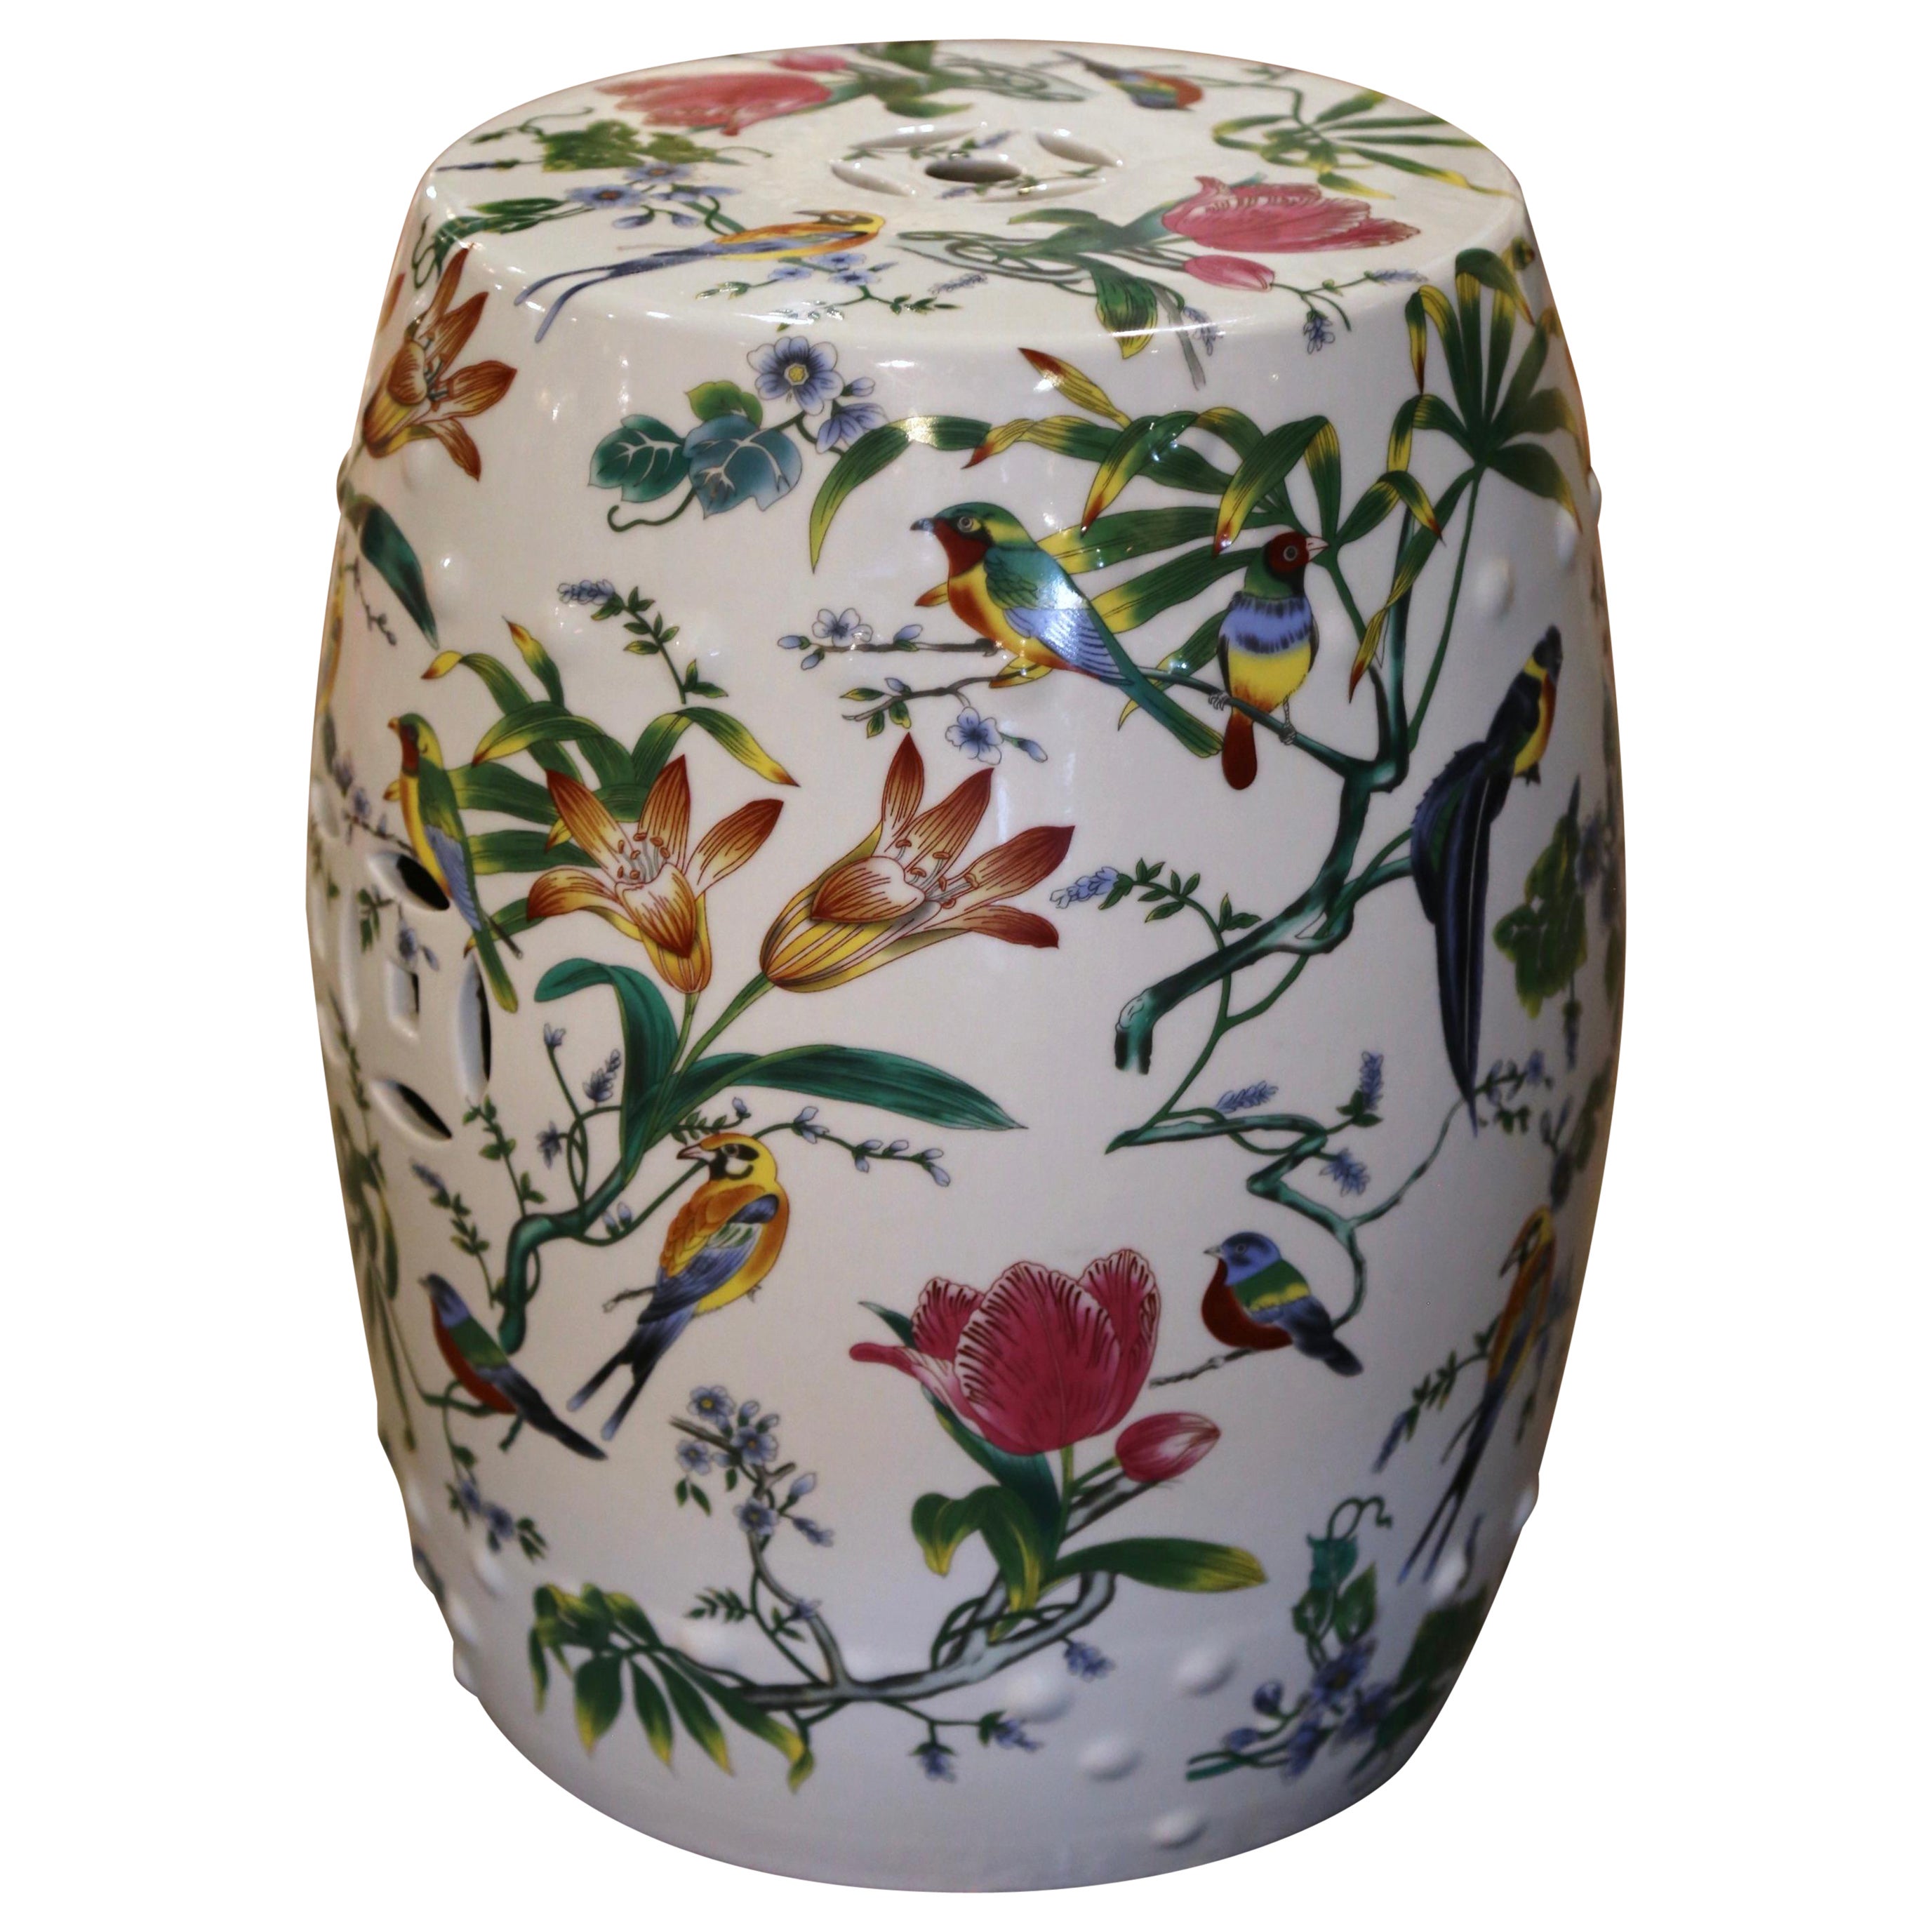 Mid-Century Chinese Porcelain Garden Stool with Bird and Floral Motifs